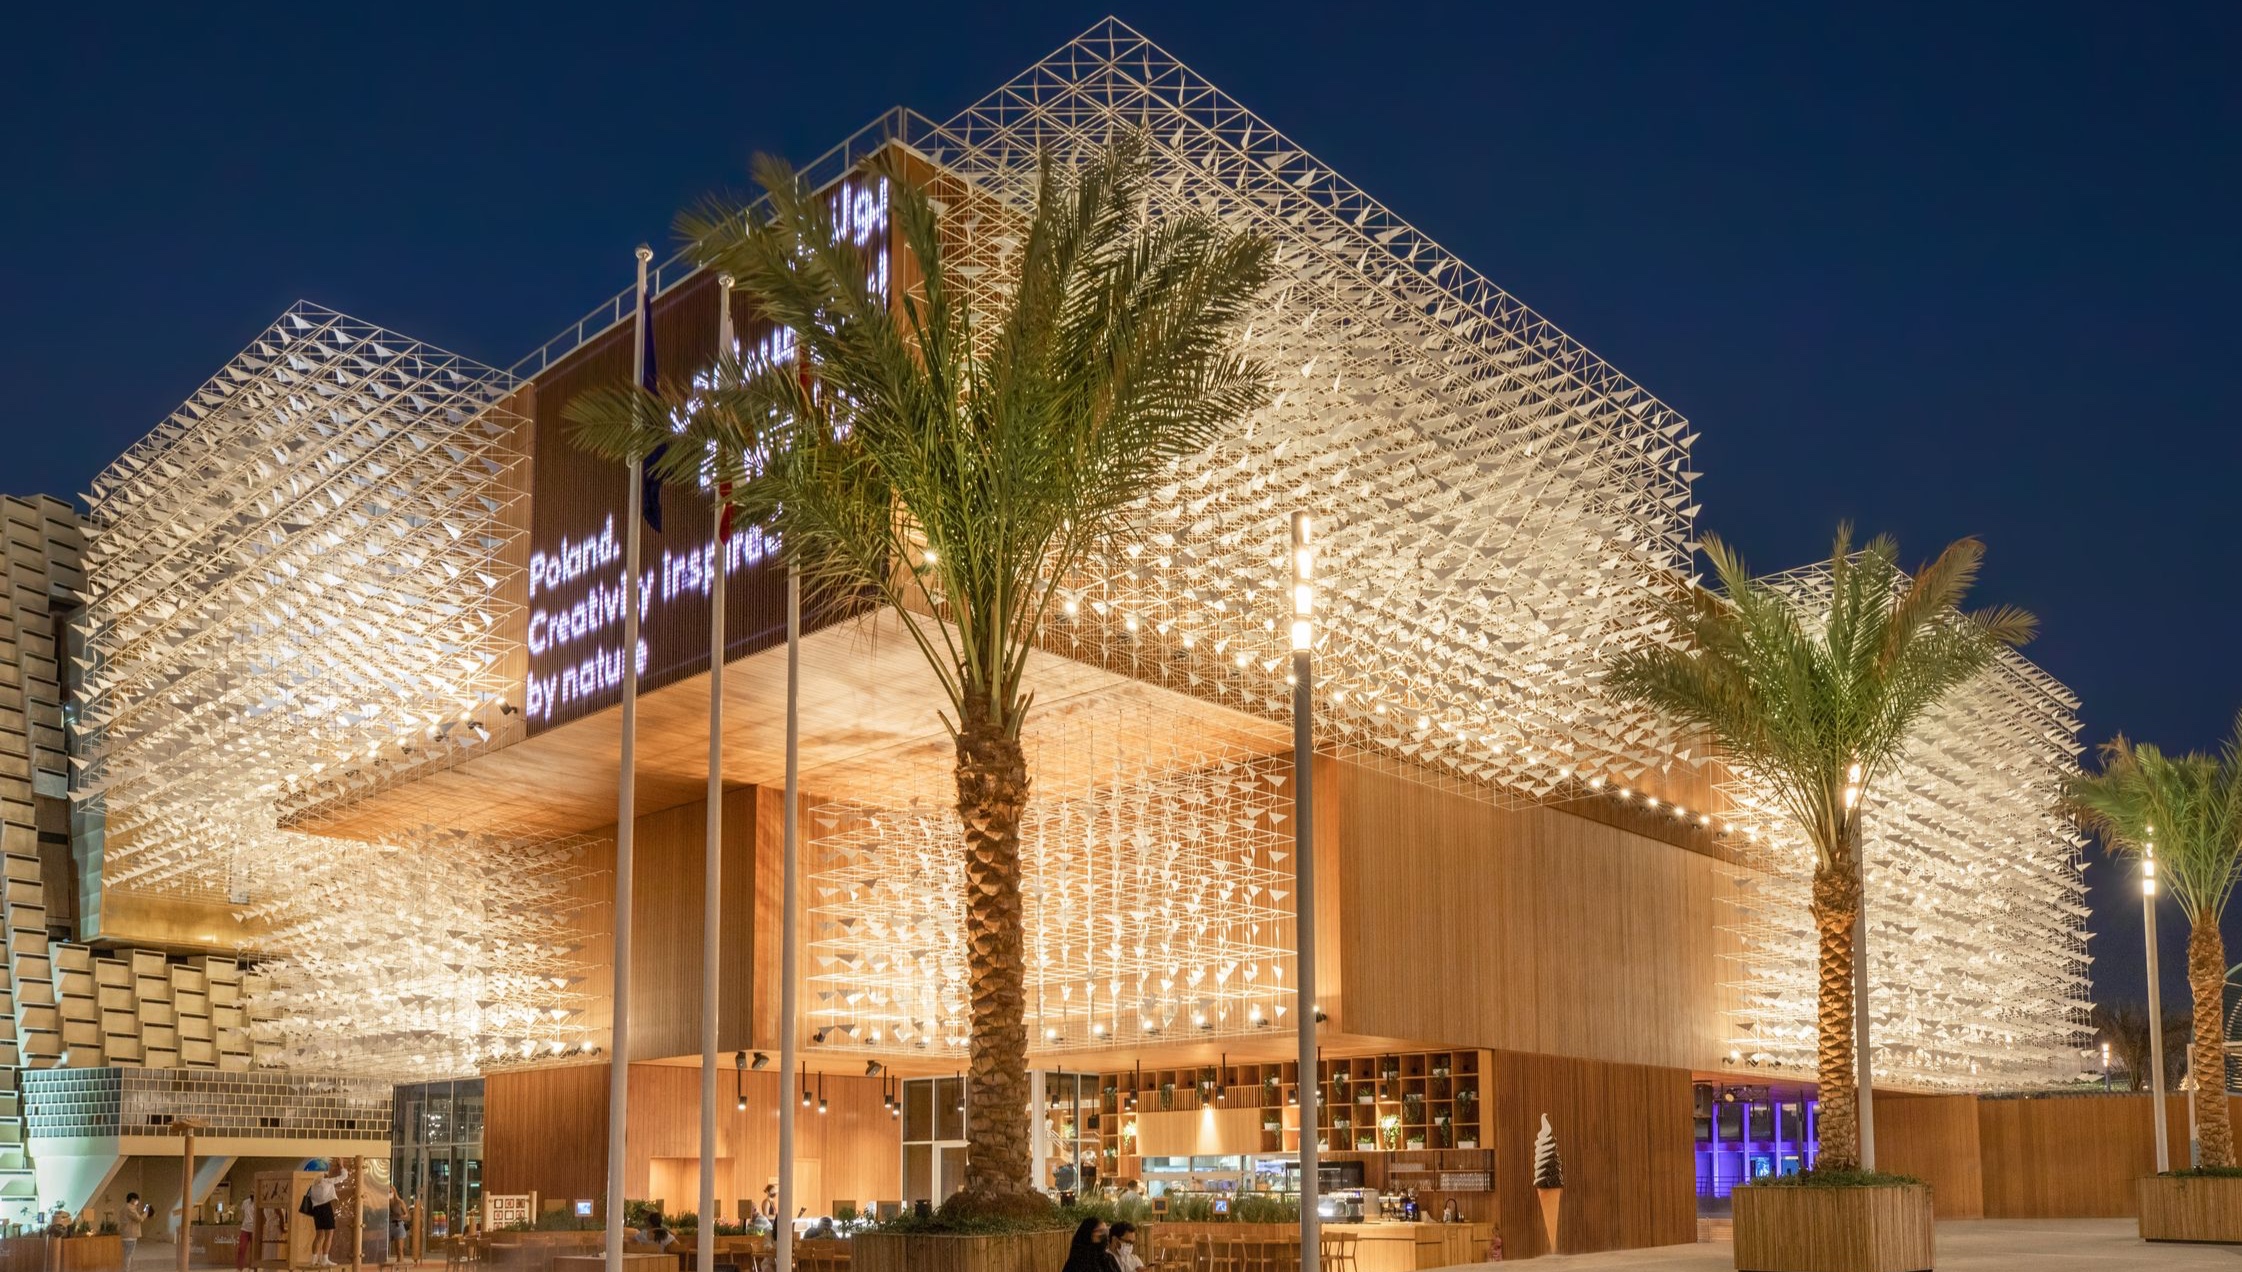 Poland Pavilion as one of the most spectacular at Expo 2020 Dubai